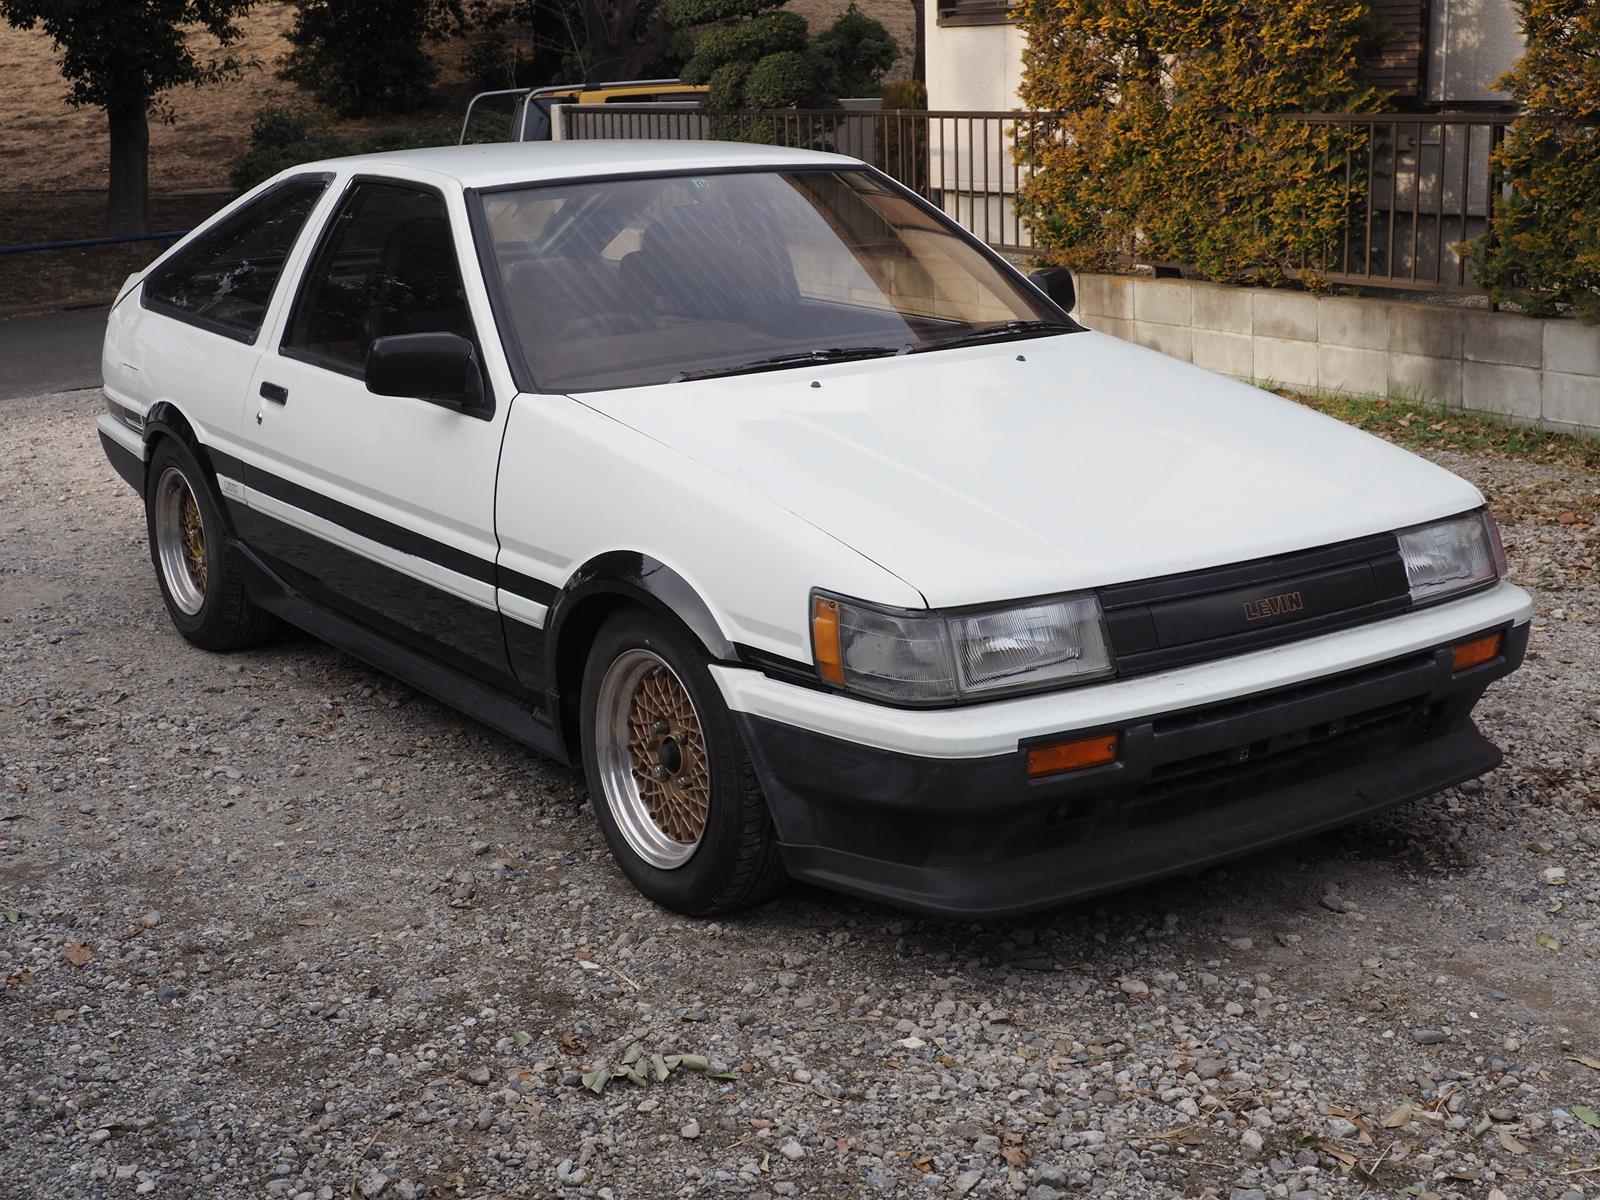 "Kentucky AE86: A Levin Story" .